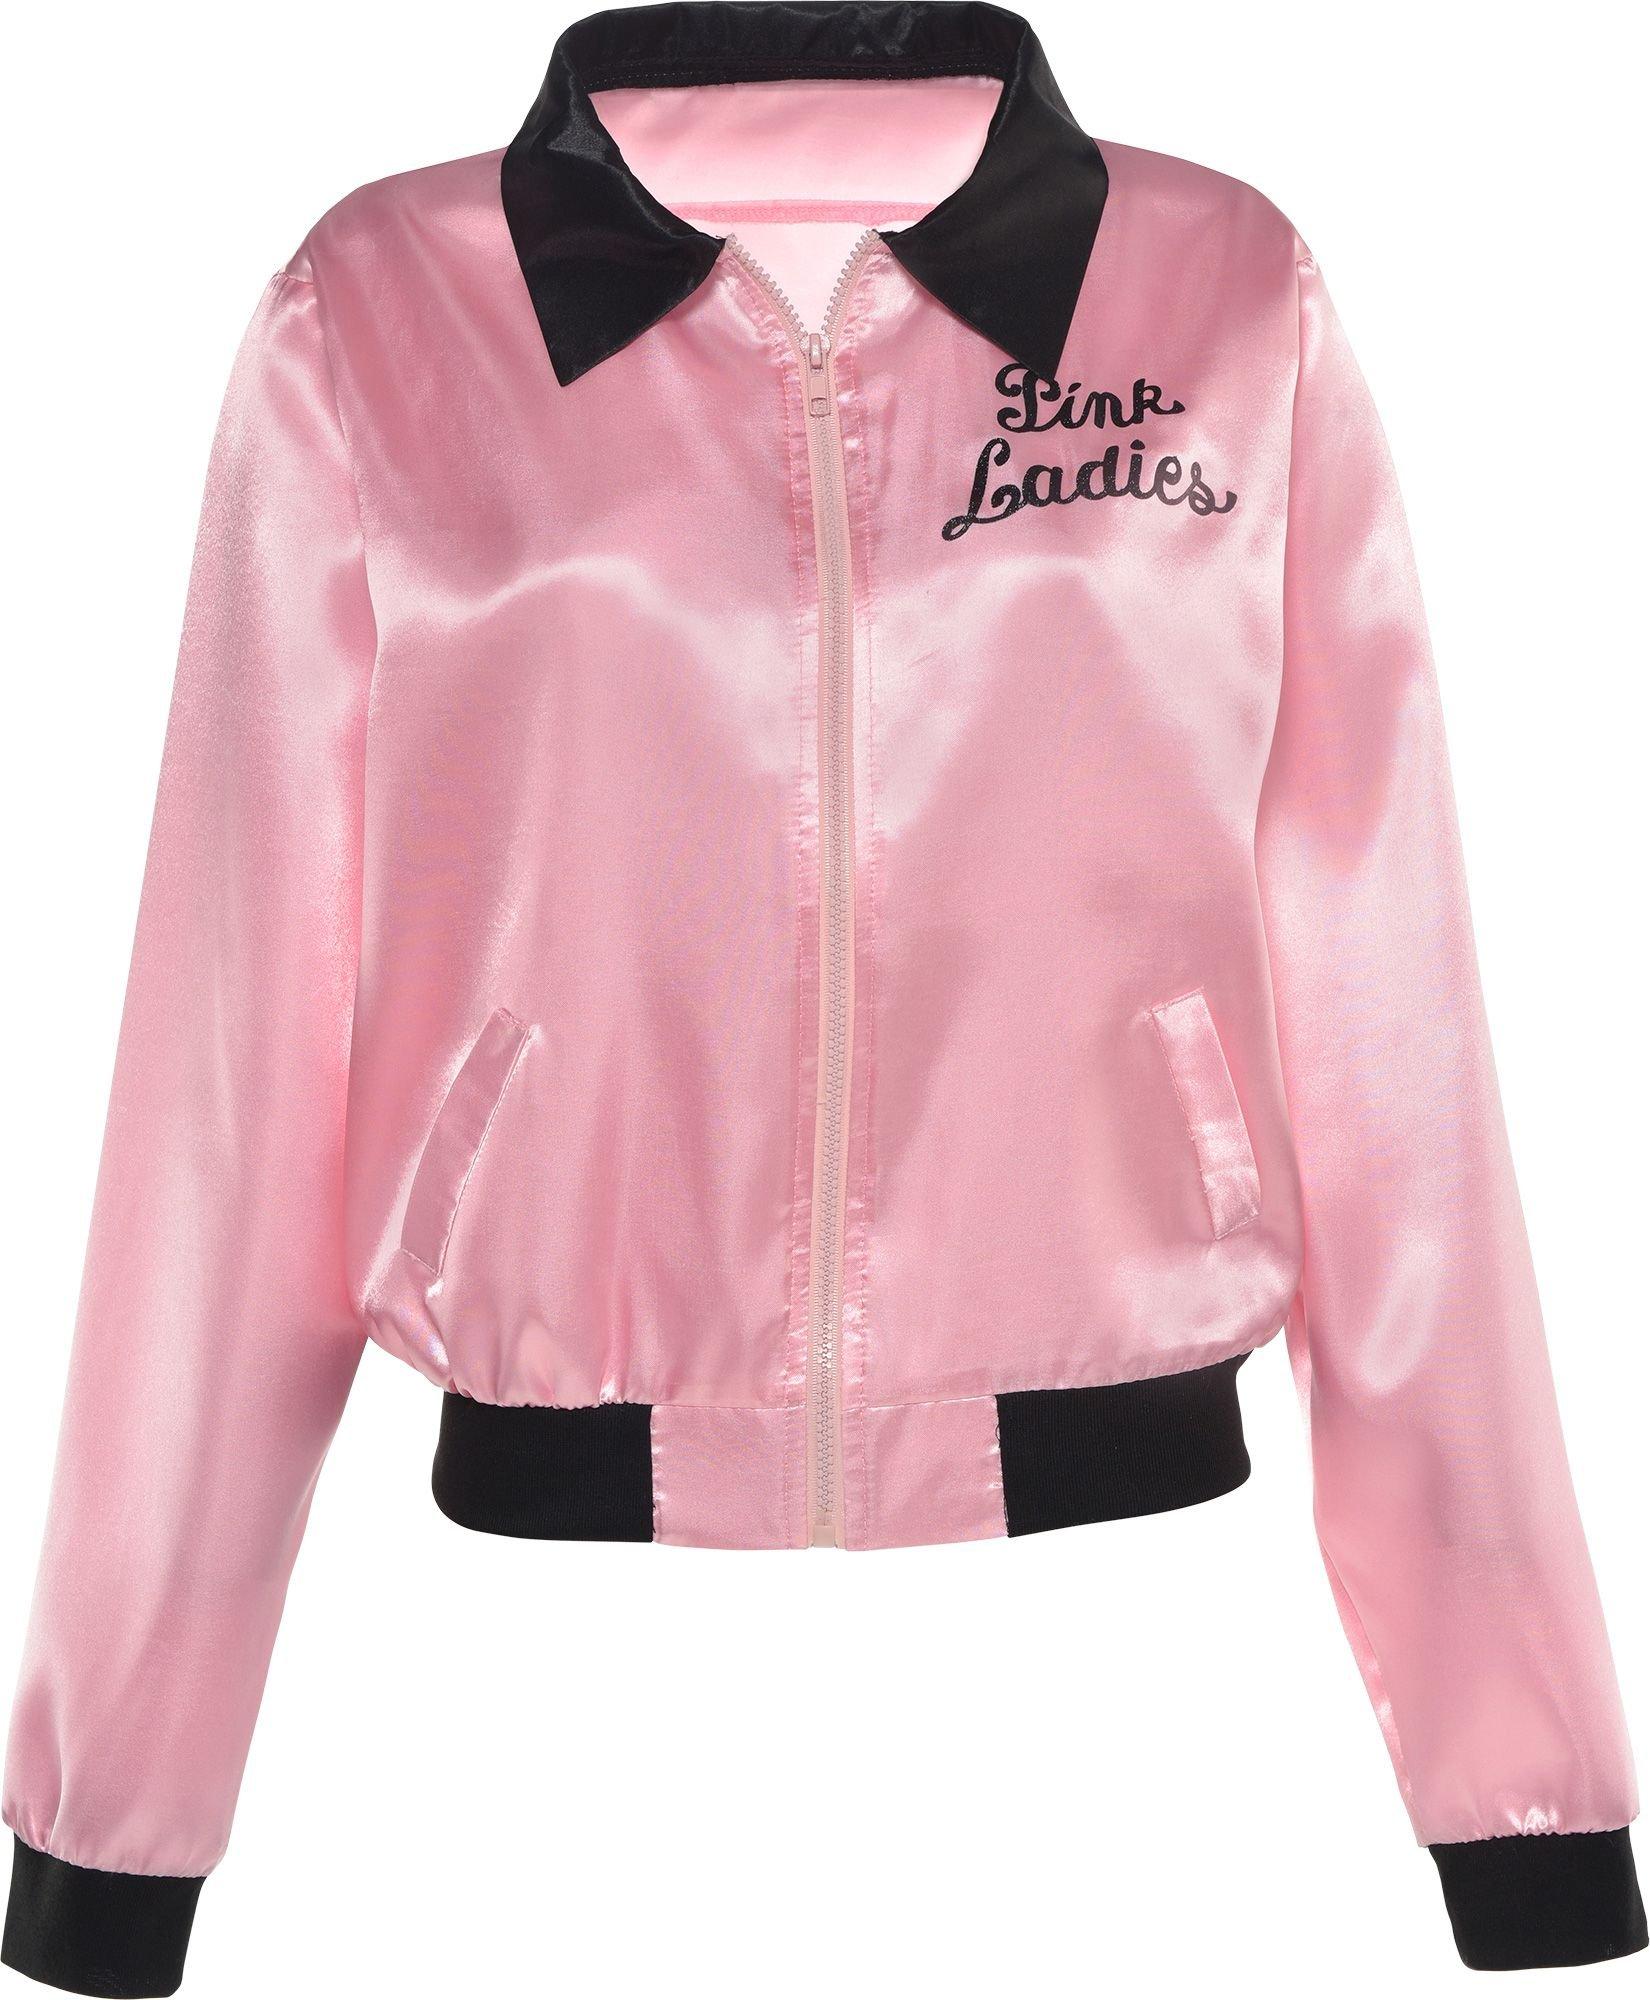 Smiffy's Grease Pink Ladies Jacket (28385) desde 18,74 €